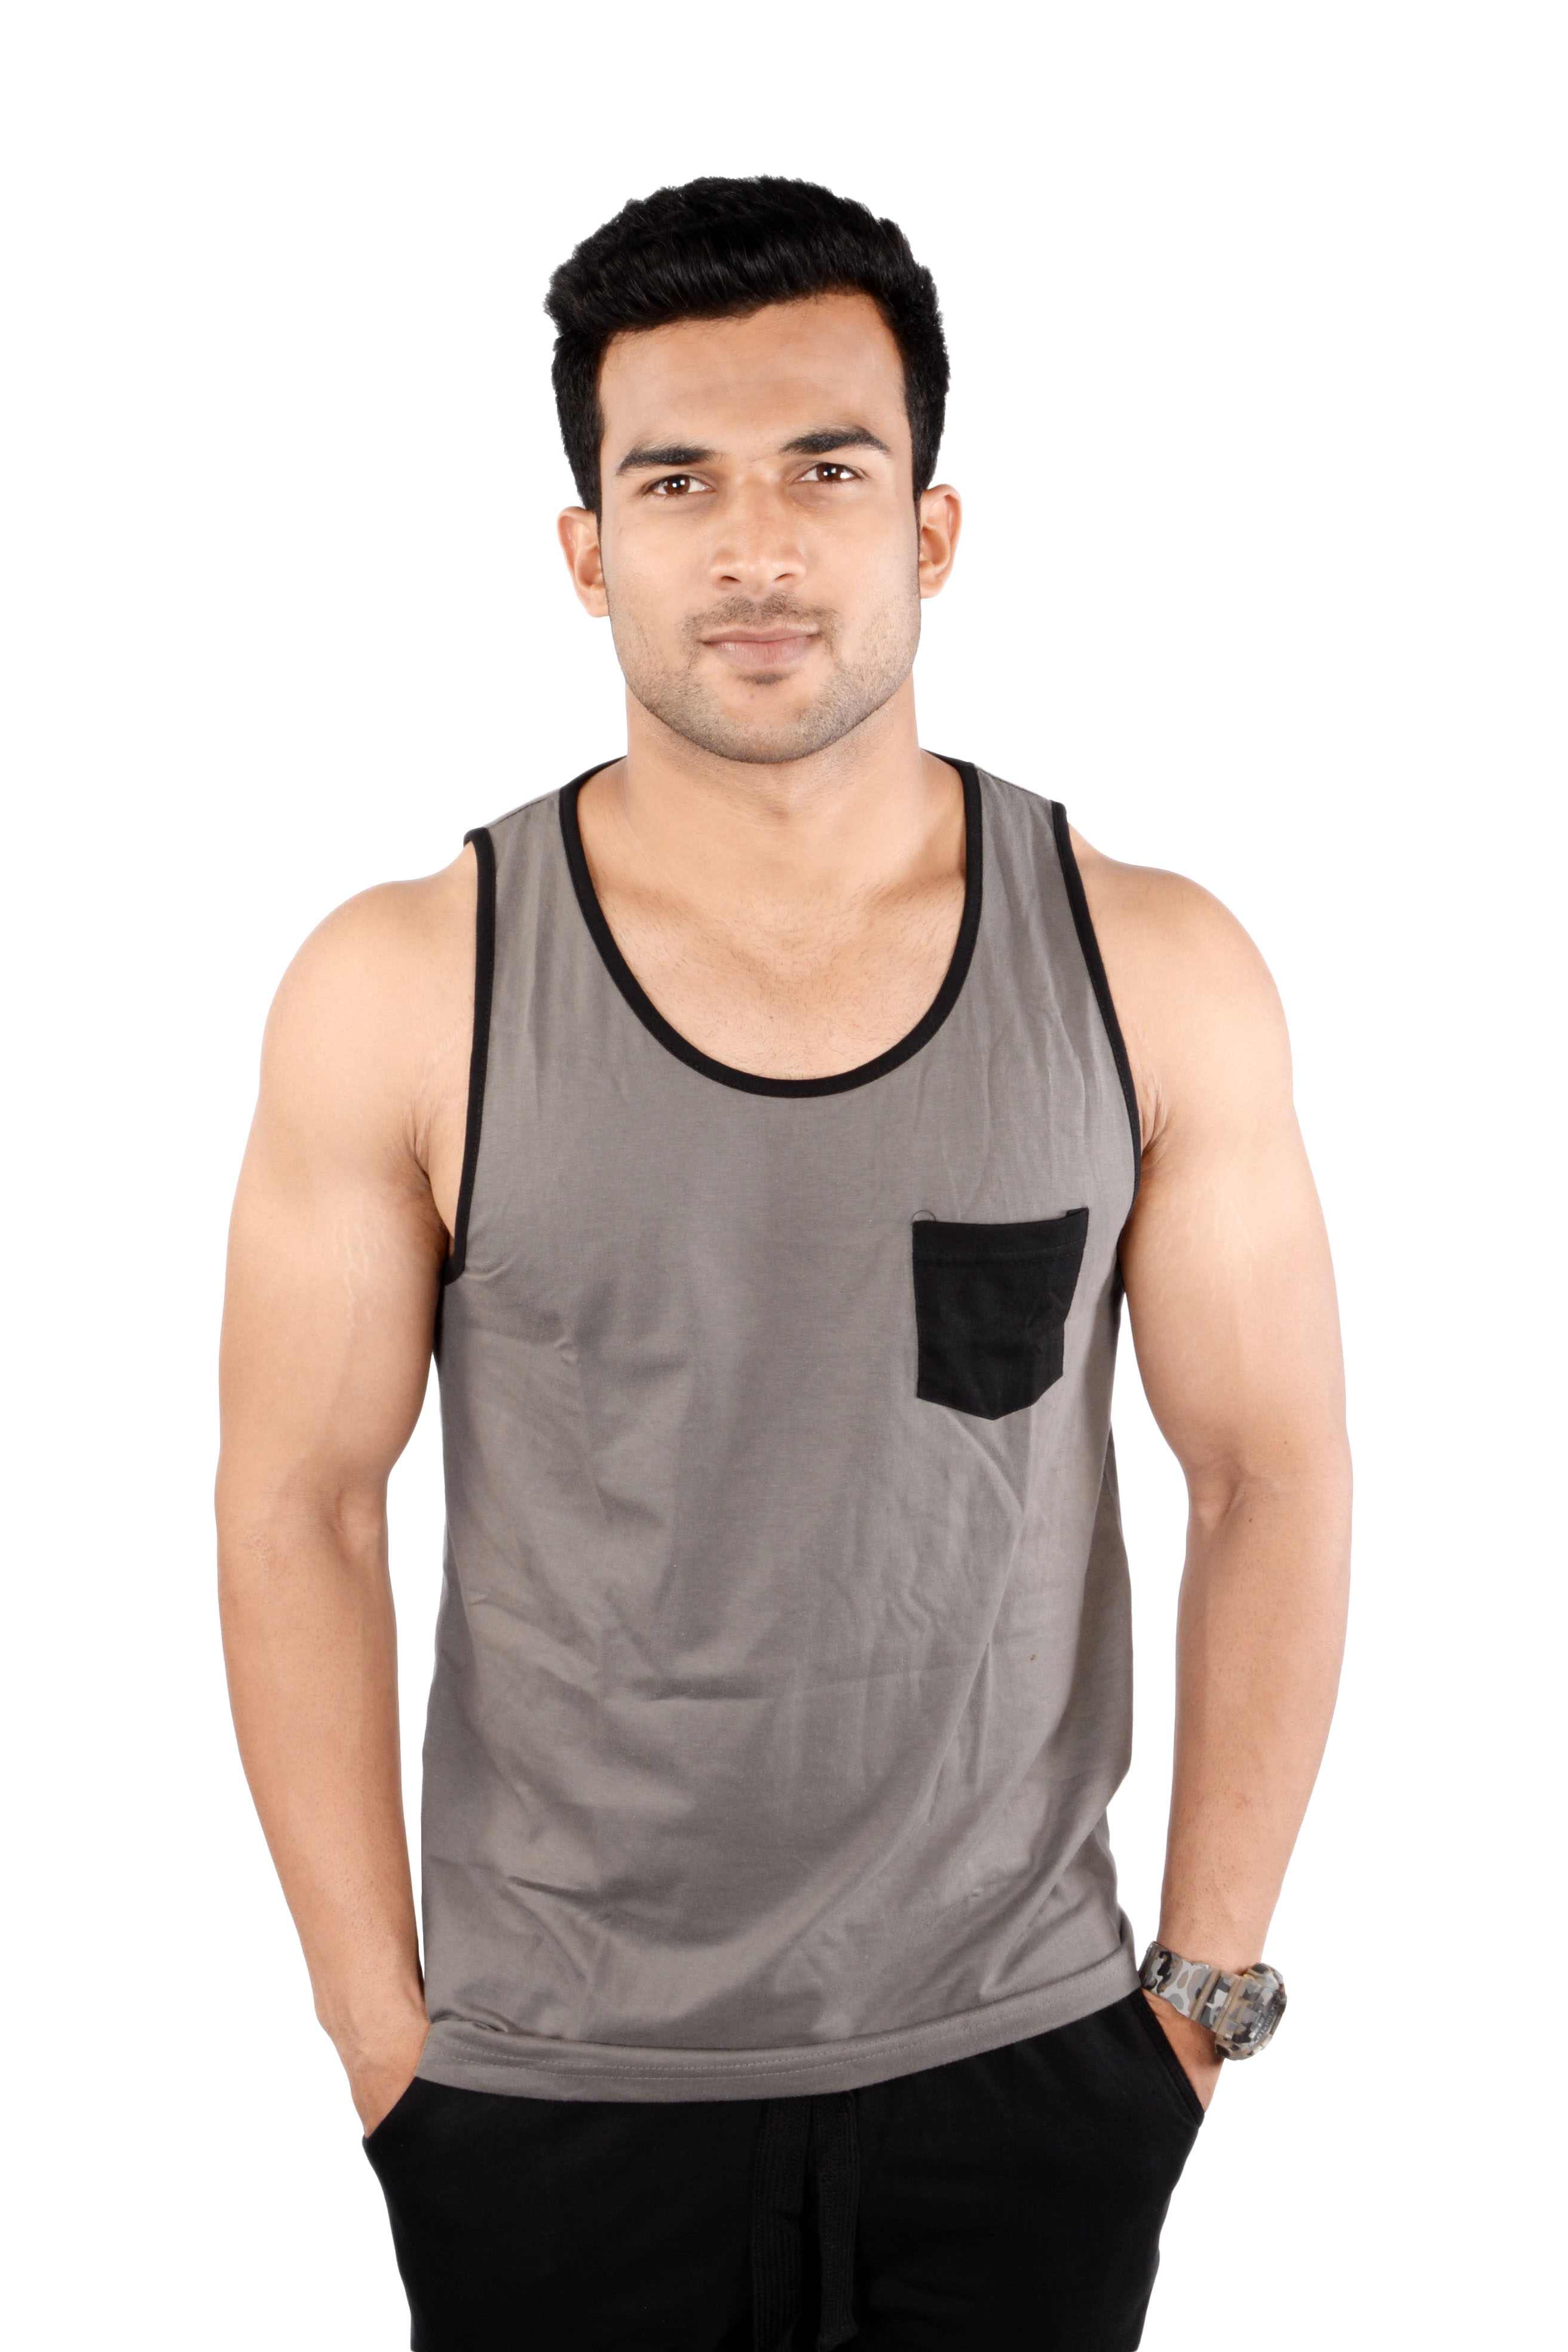 Buy Mens Tank Top Online @ ₹259 from ShopClues